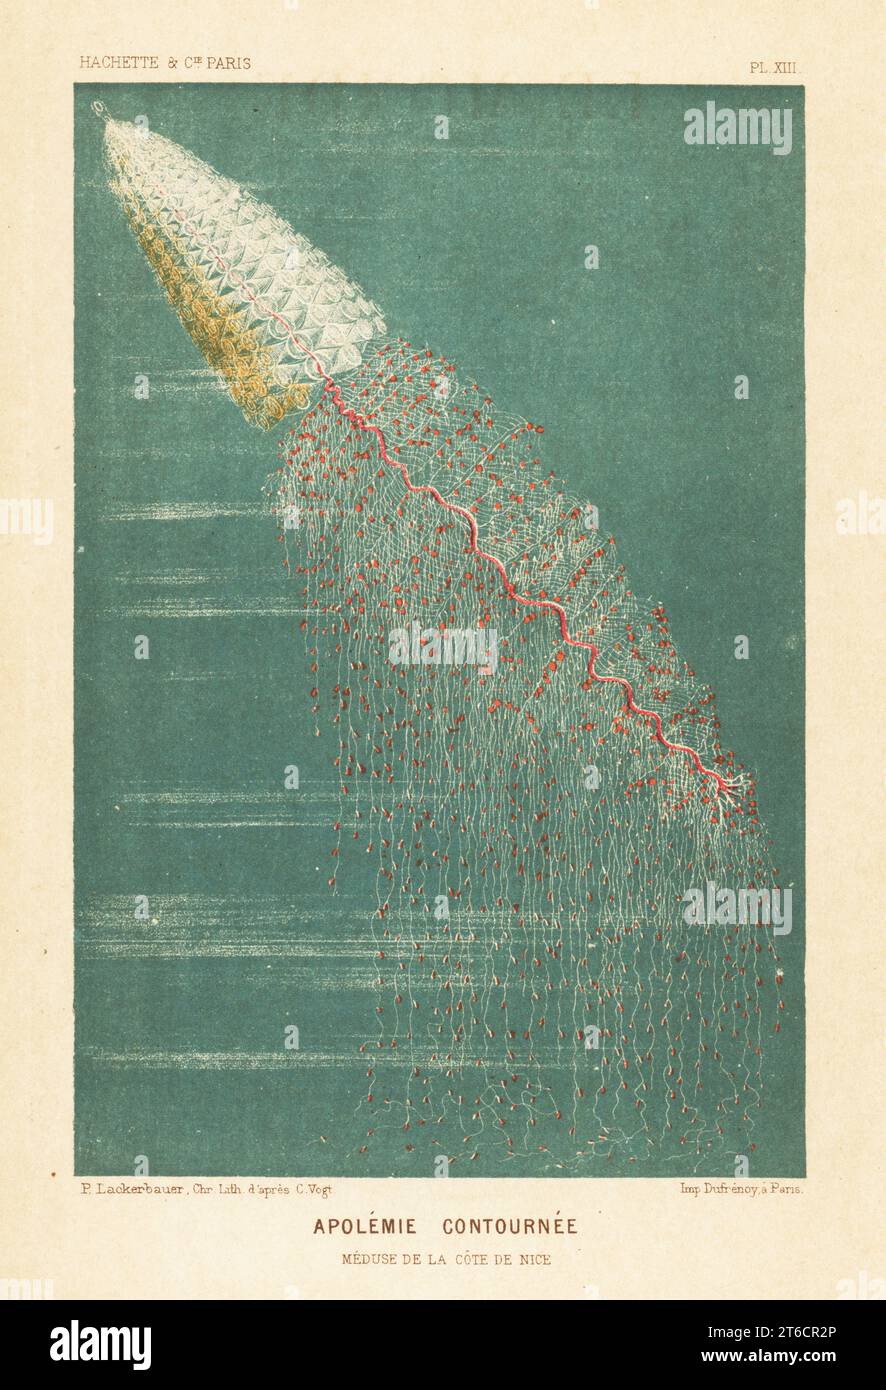 Siphonophore or string jellyfish, Apolemia contorta, from the Mediterranean coast off Nice. Apolemie contournee. Zooid, or floating colony of polyps and medusoids. Meduse de la cote de Nice. Chromolithograph by Pierre Lackerbauer after Carl Vogt from Alfred Fredols Le Monde de la Mer, the World of the Sea, edited by Olivier Fredol, Librairie Hachette et. Cie., Paris, 1881. Alfred Fredol was the pseudonym of French zoologist and botanist Alfred Moquin-Tandon, 1804-1863. Stock Photo